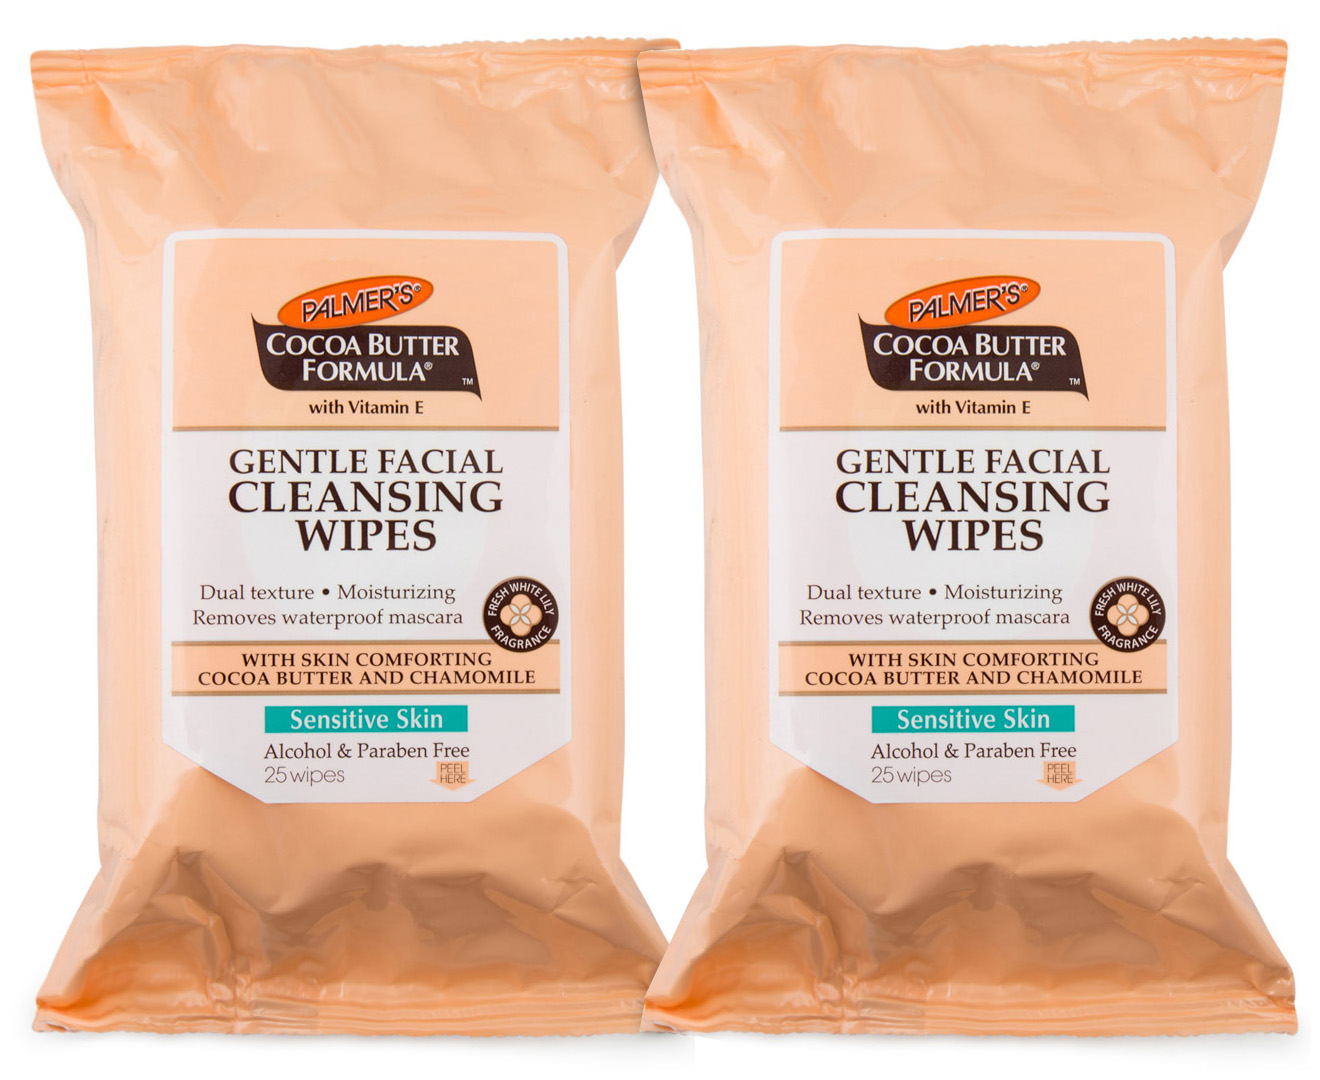 2 x Palmer's Cocoa Butter Formula Gentle Facial Cleansing Wipes 25pk